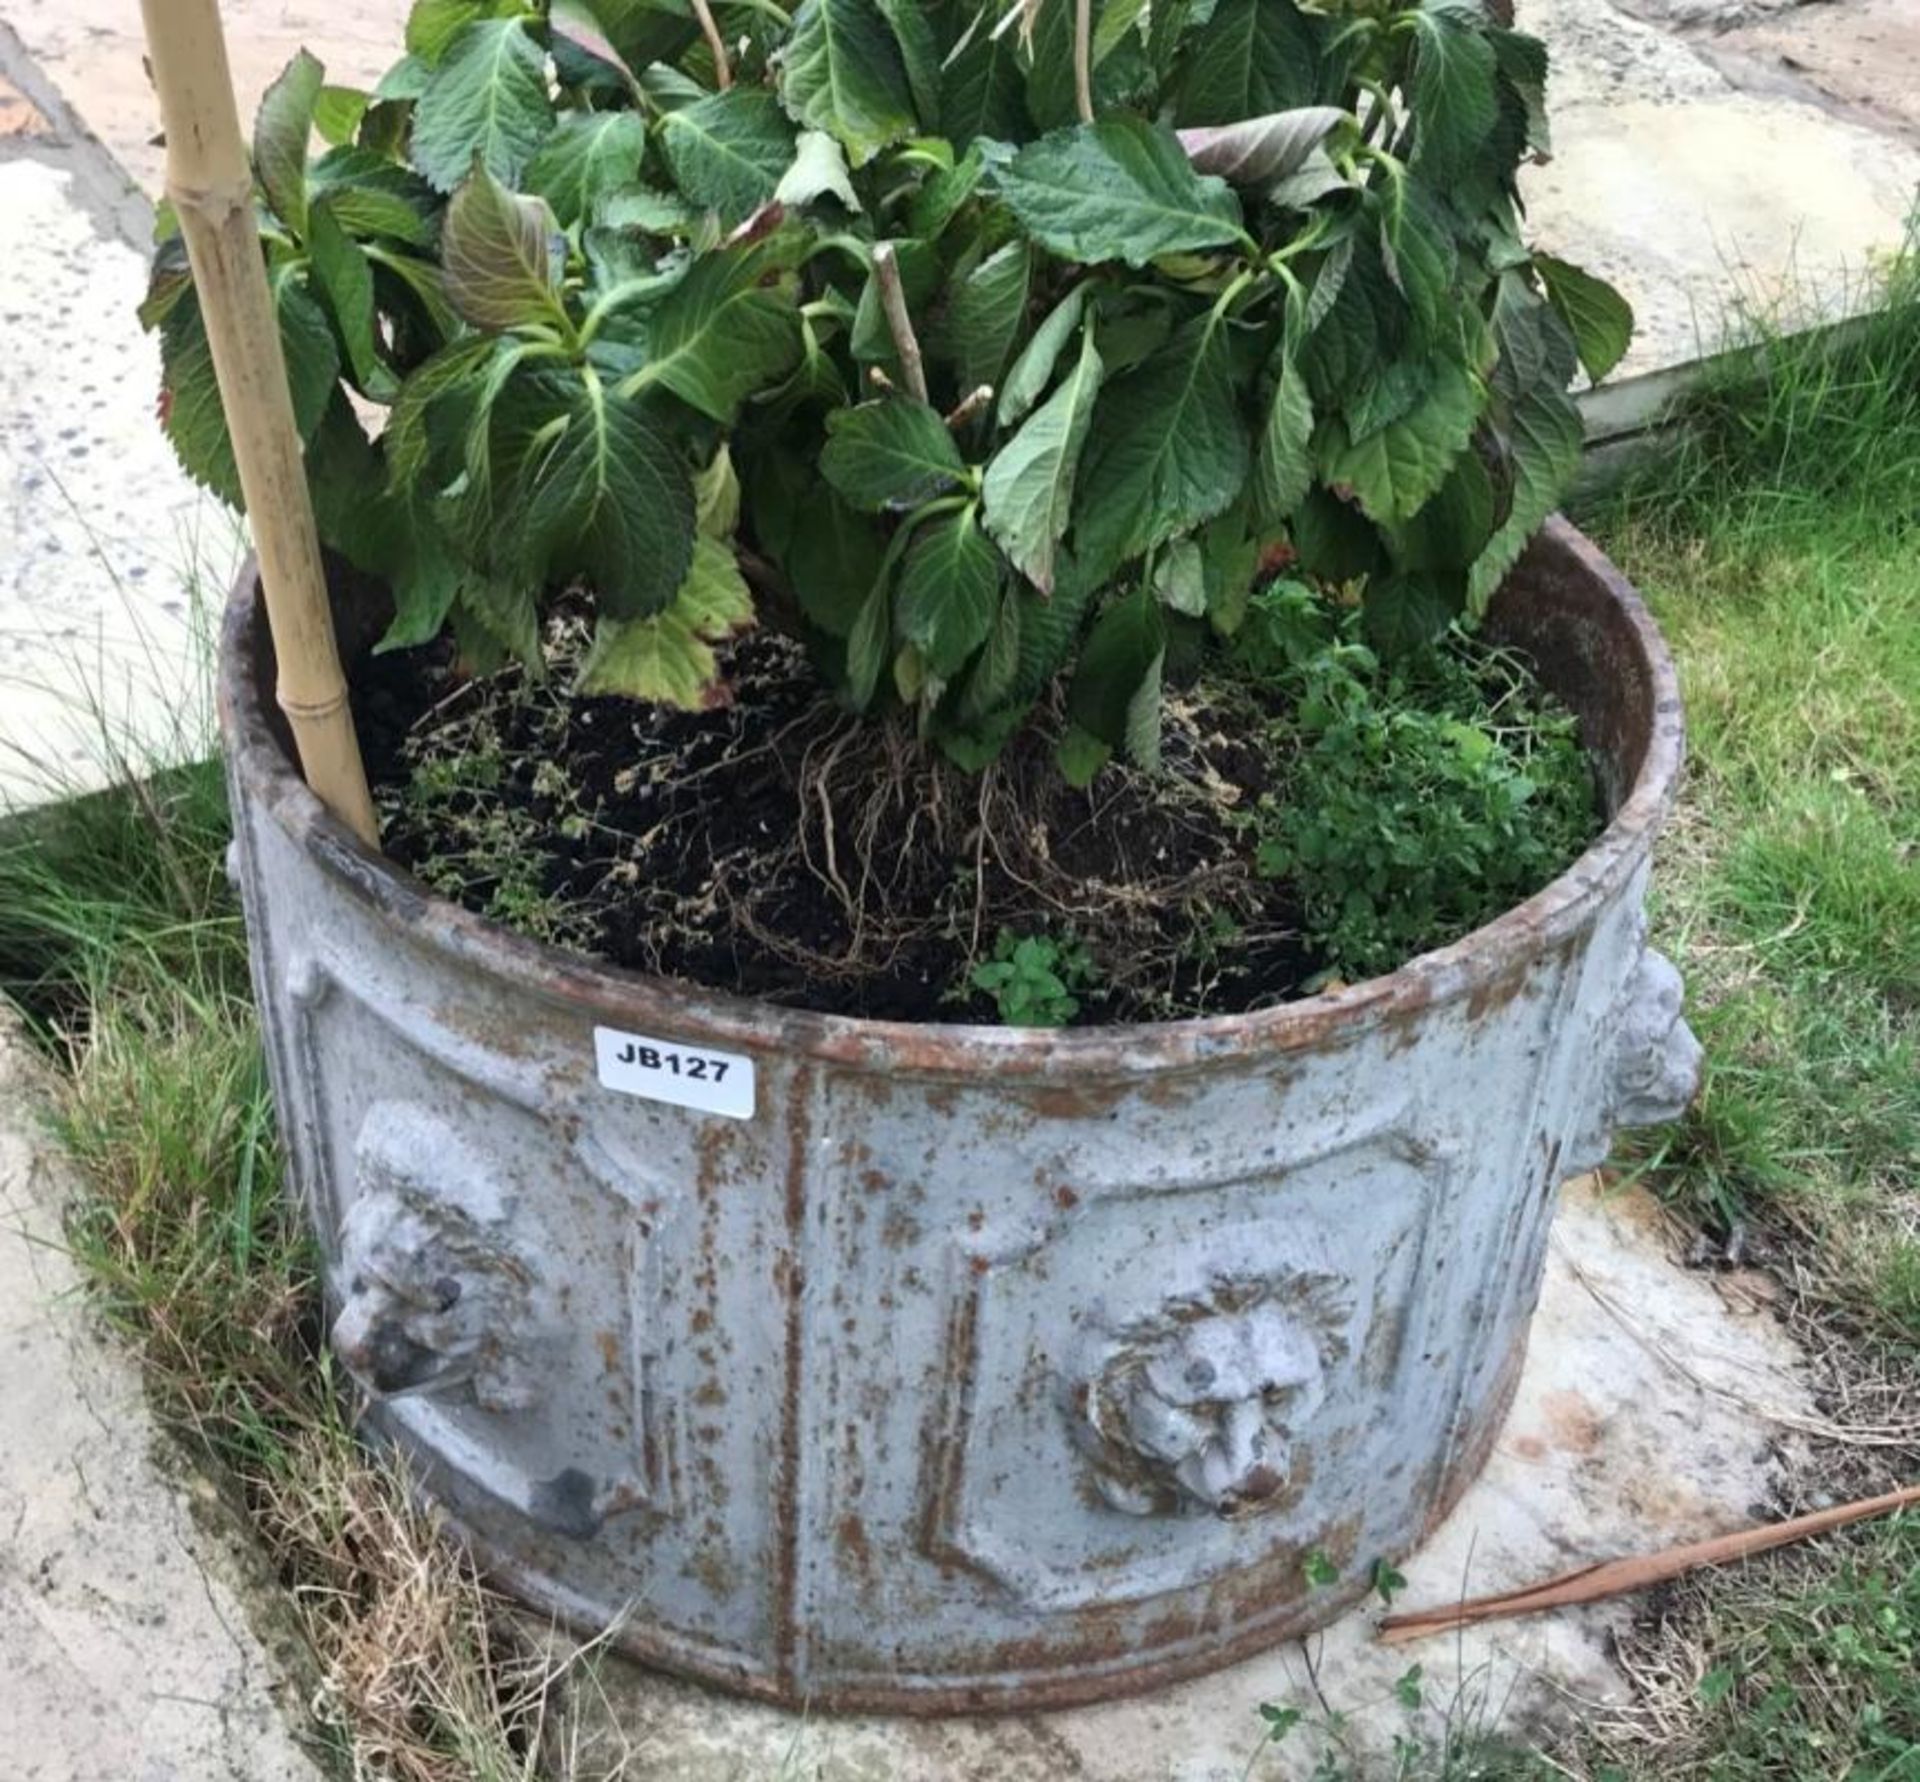 1 x Large Round Cast Iron Planter / Trough With Lion Heads Around The Circumference - Dimensions: Di